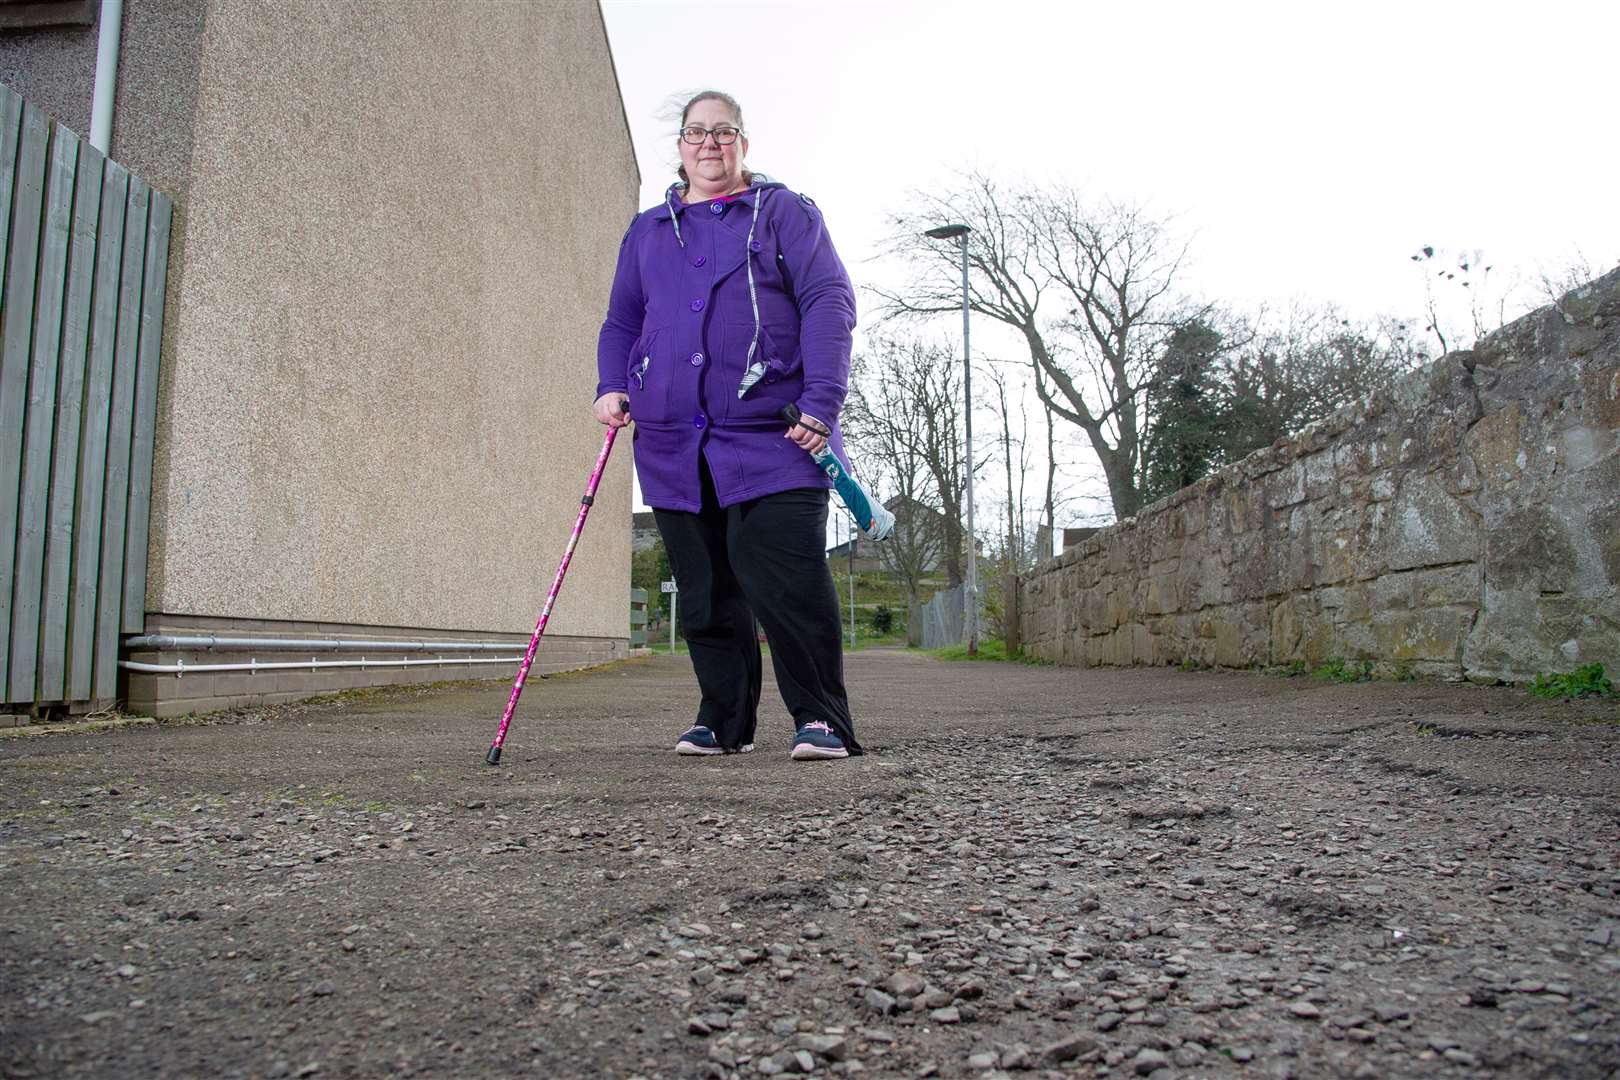 Forres Community Councillor Fiona Graham asked Moray Council to level the uneven path at Nursery Lane.